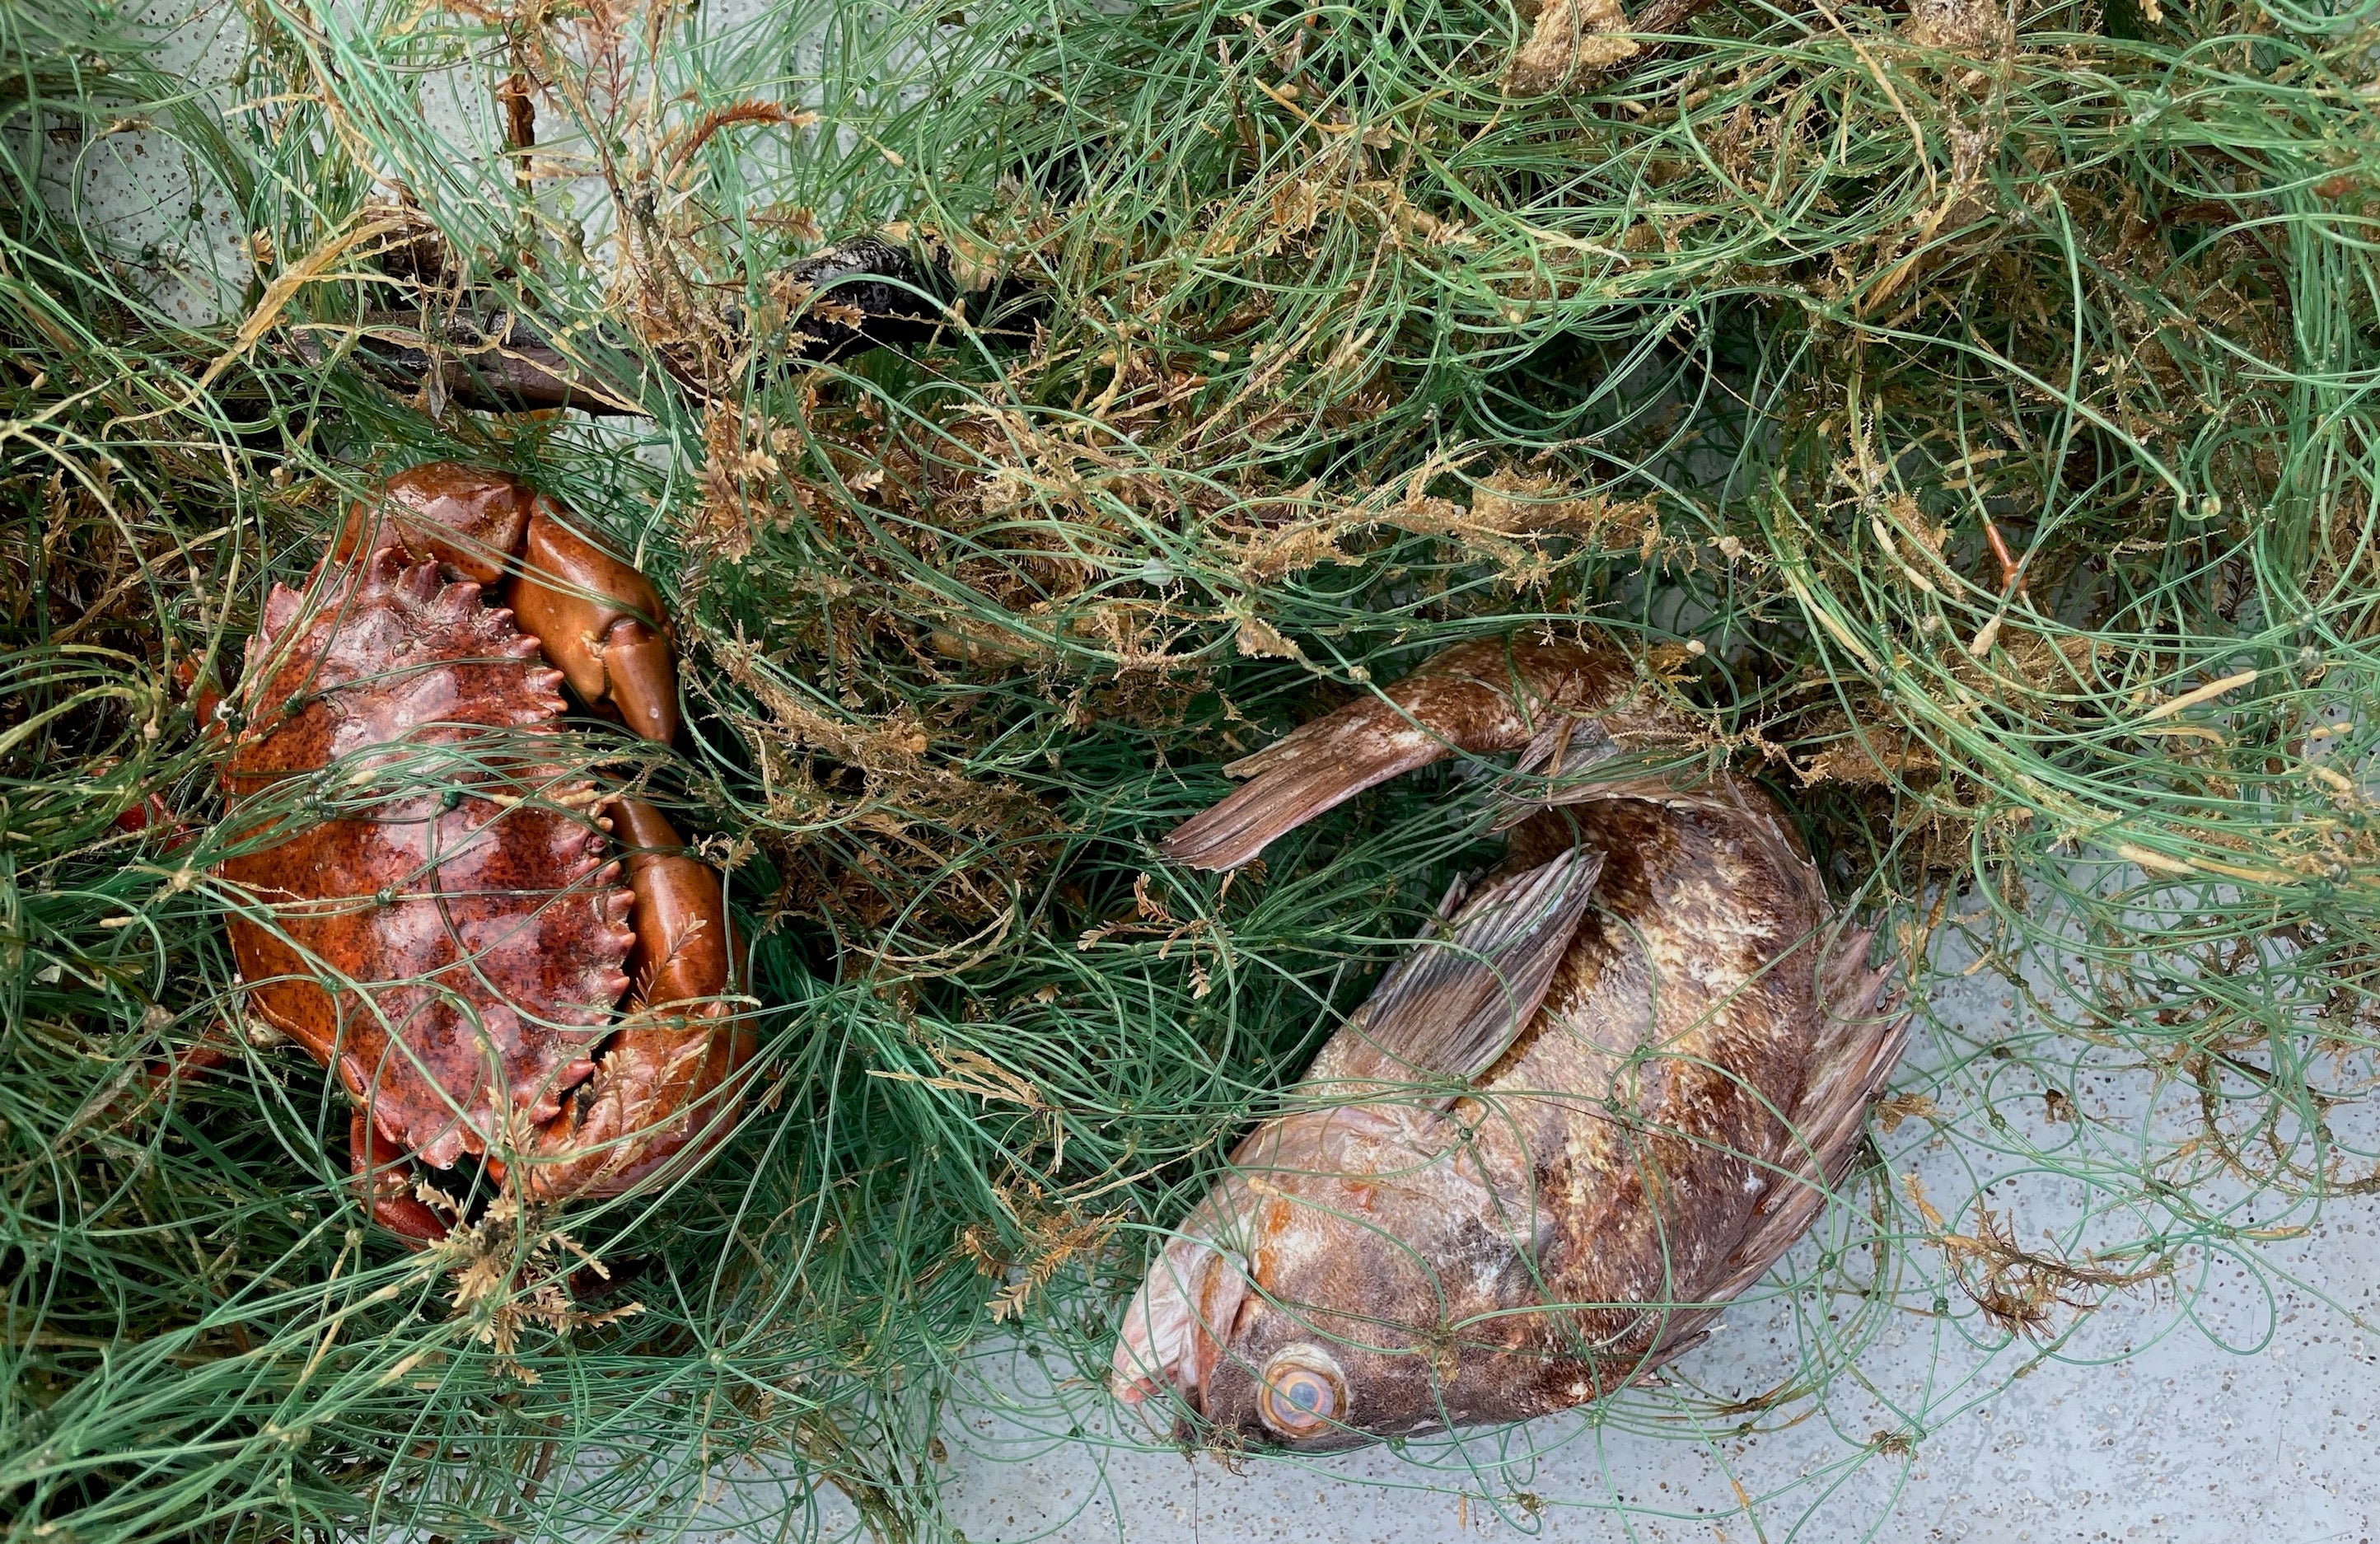 crab and dead fish entangled in green gillnet